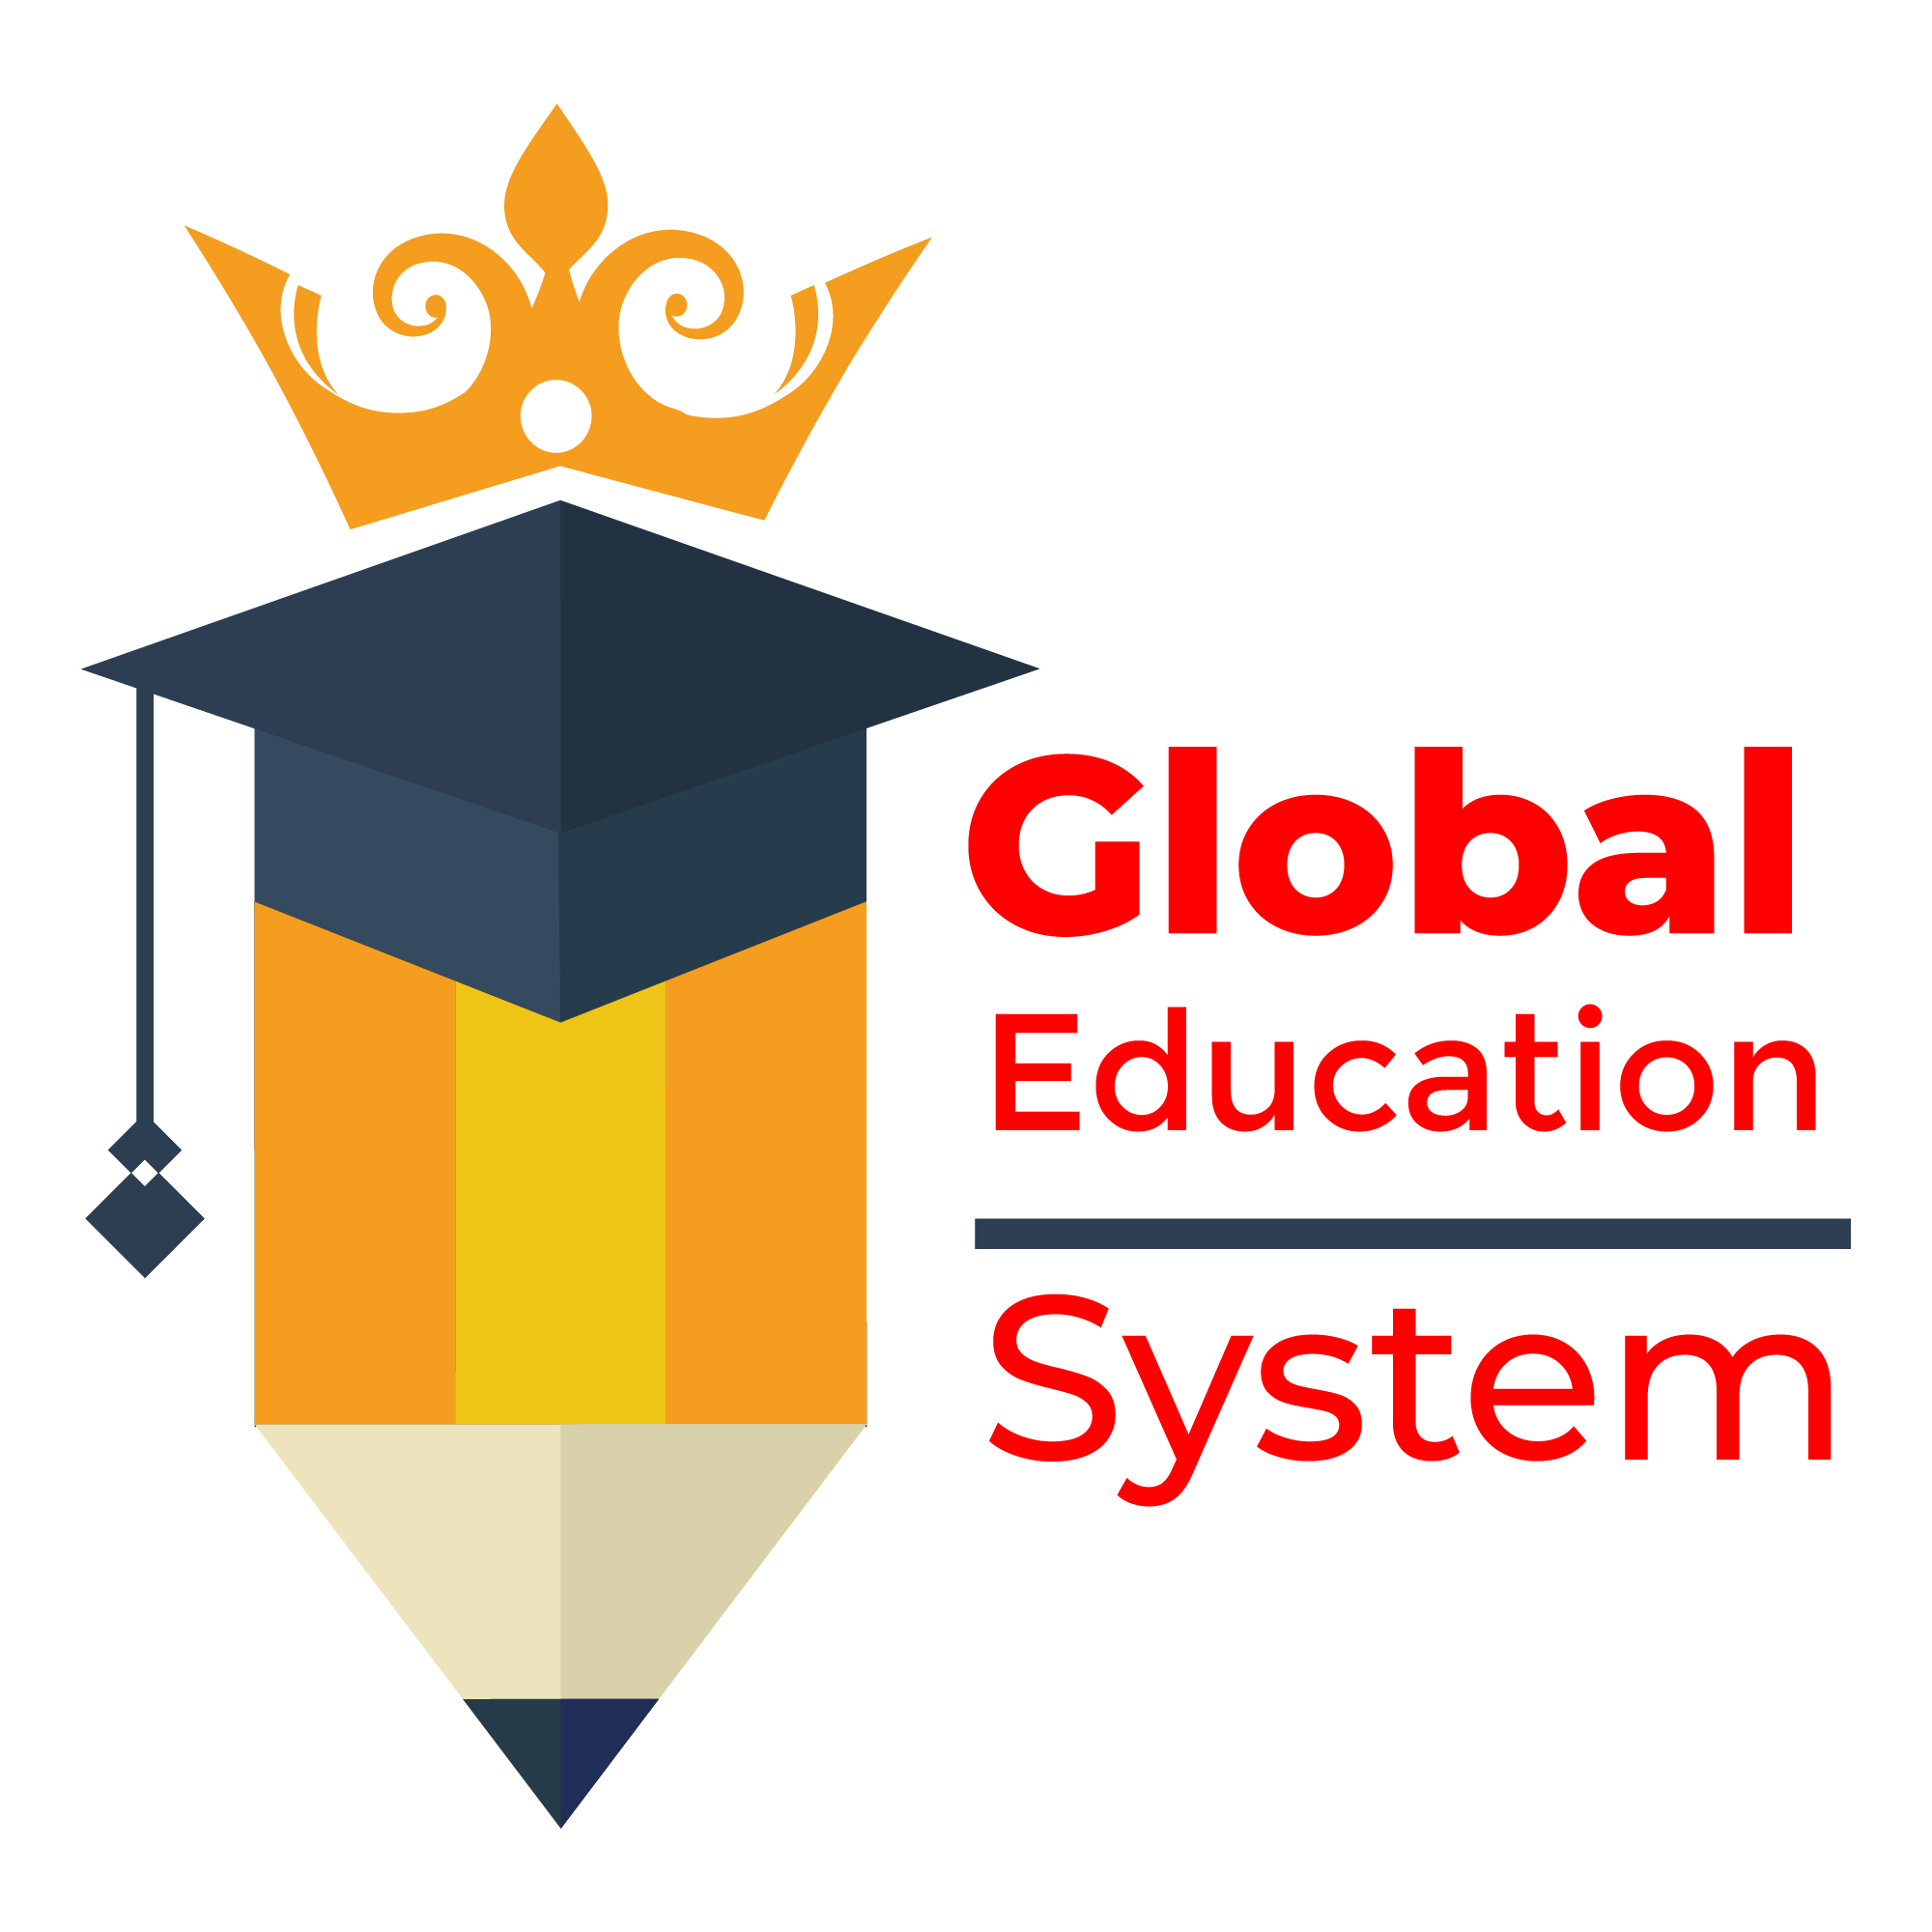 Global Education System